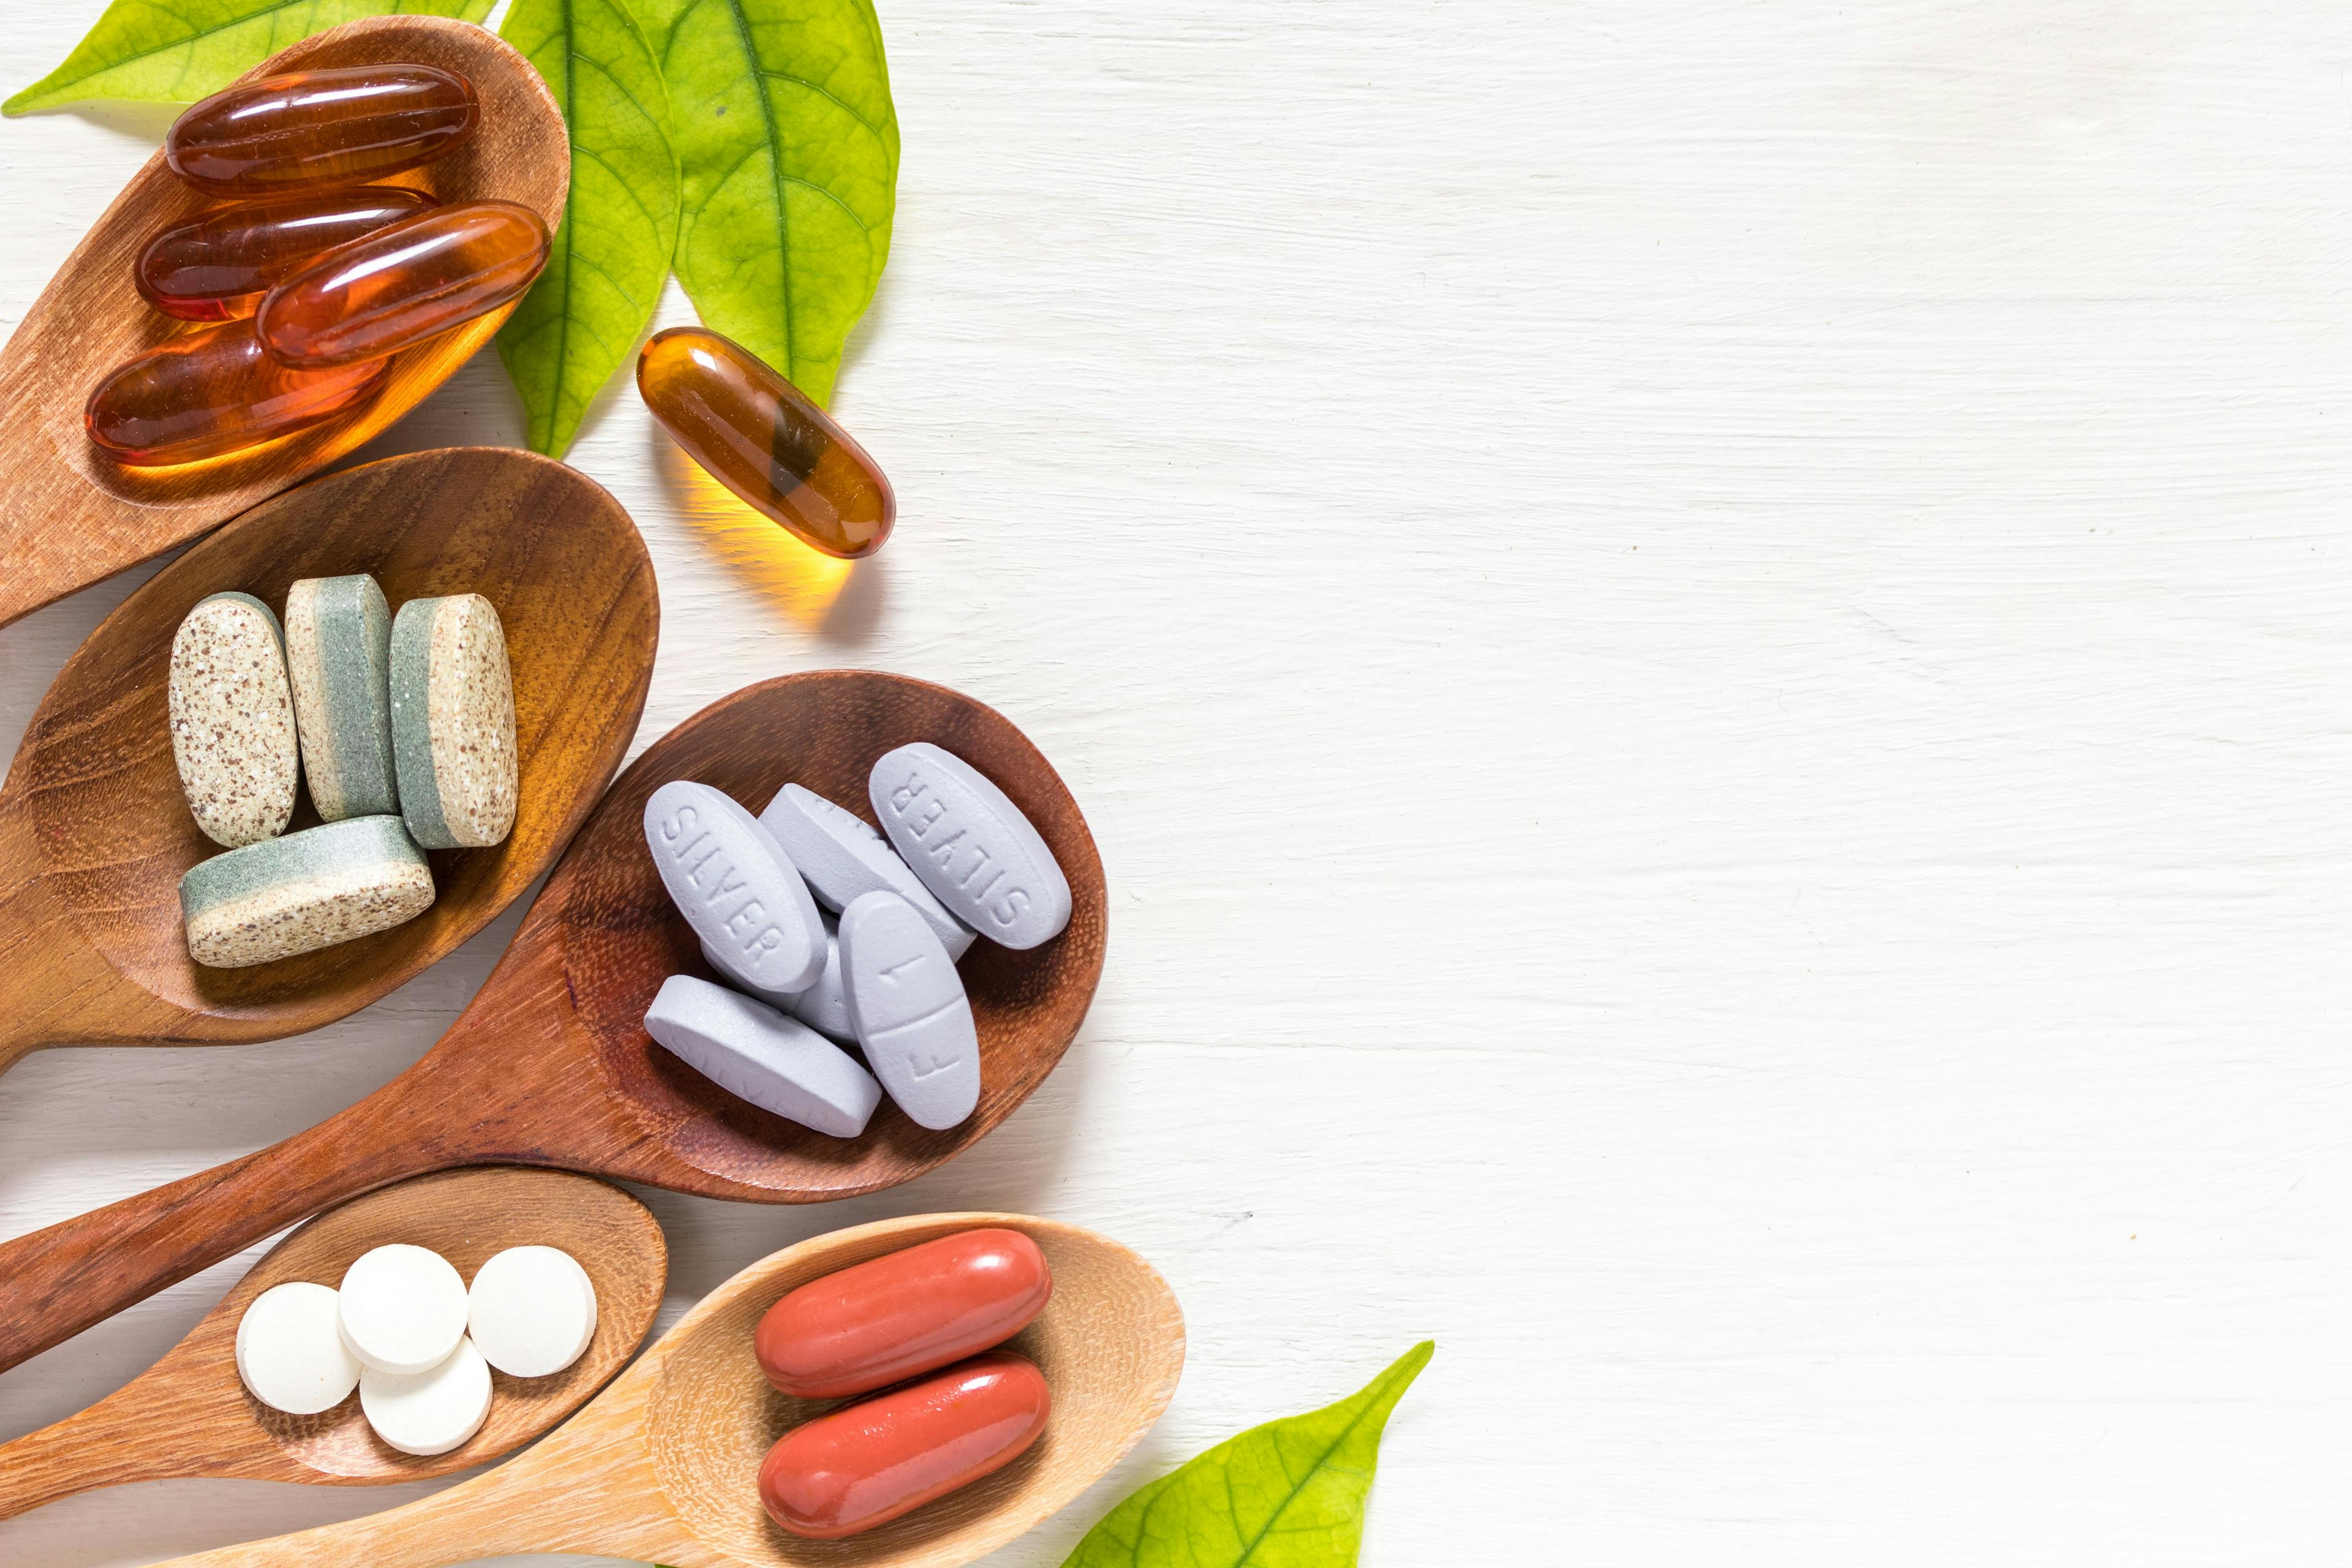 Specific dietary supplements linked to acne